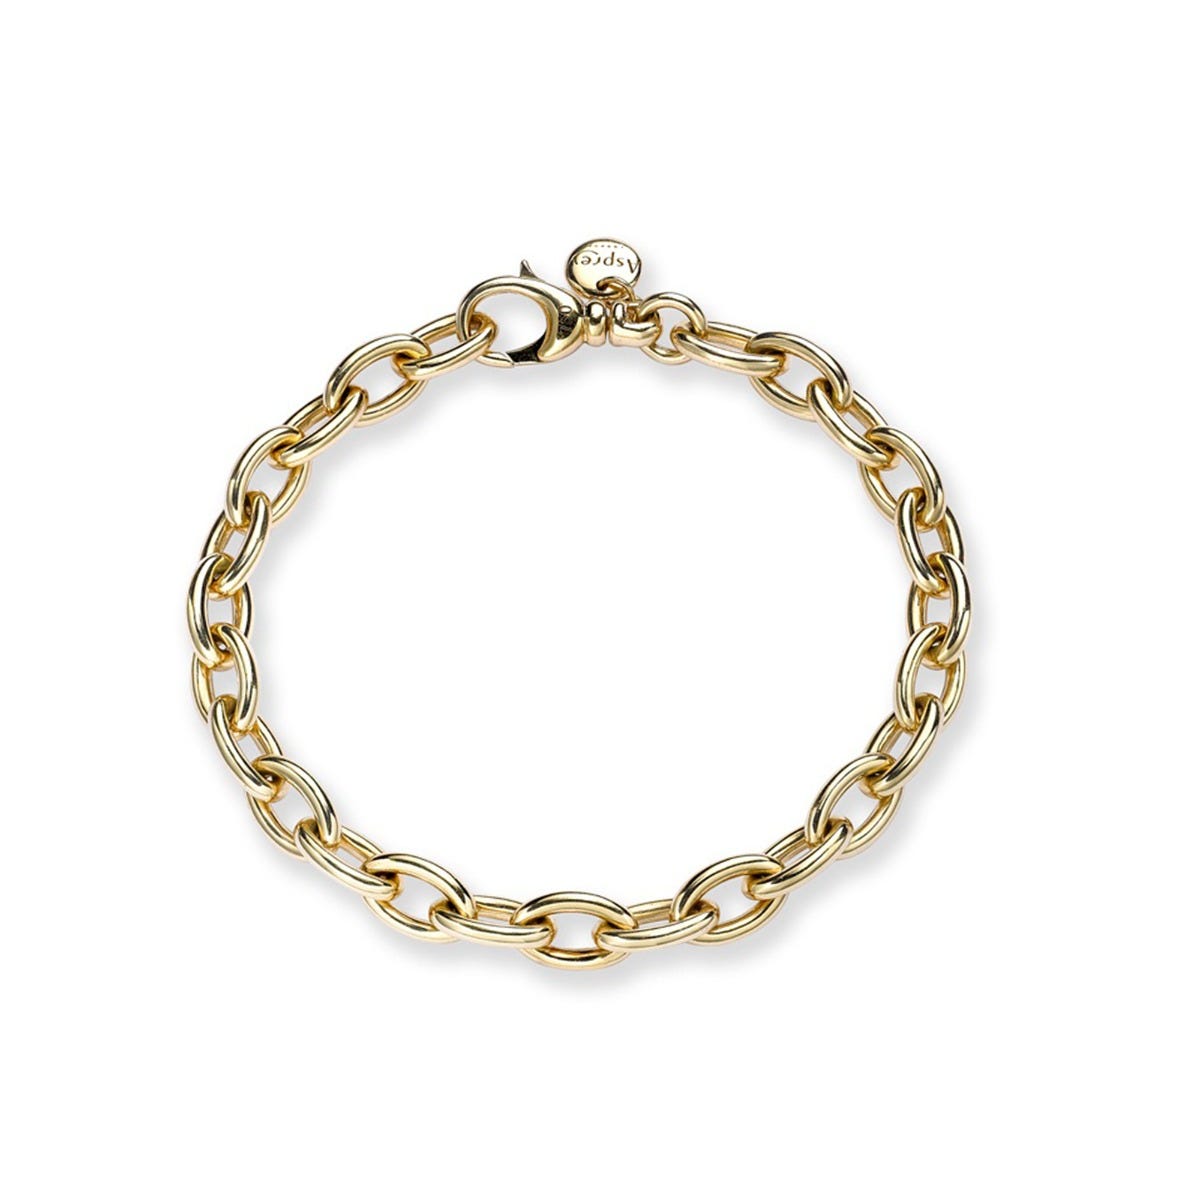 Woodland Charm Bracelet in 18ct Yellow Gold